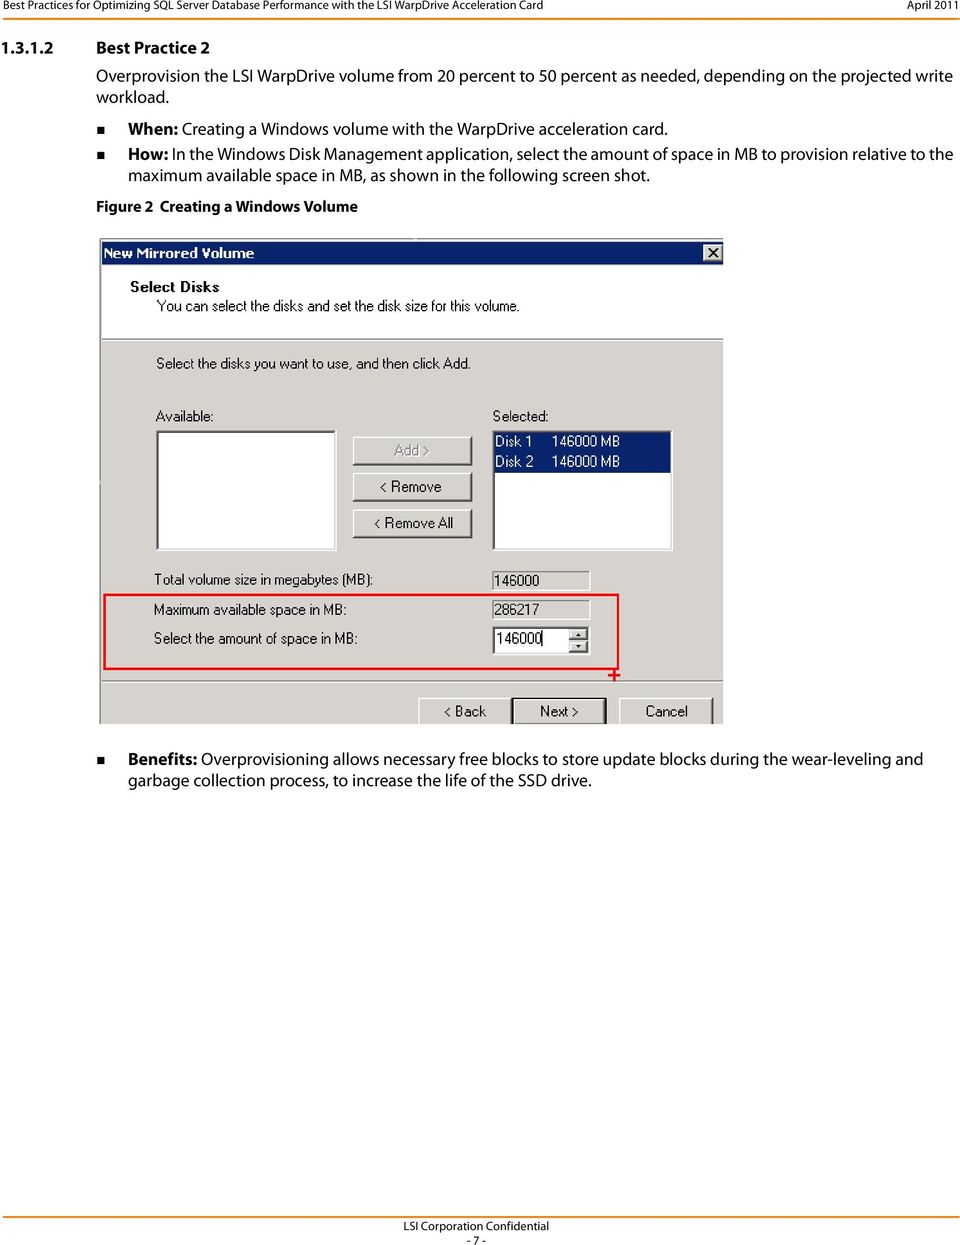 How: In the Windows Disk Management application, select the amount of space in MB to provision relative to the maximum available space in MB, as shown in